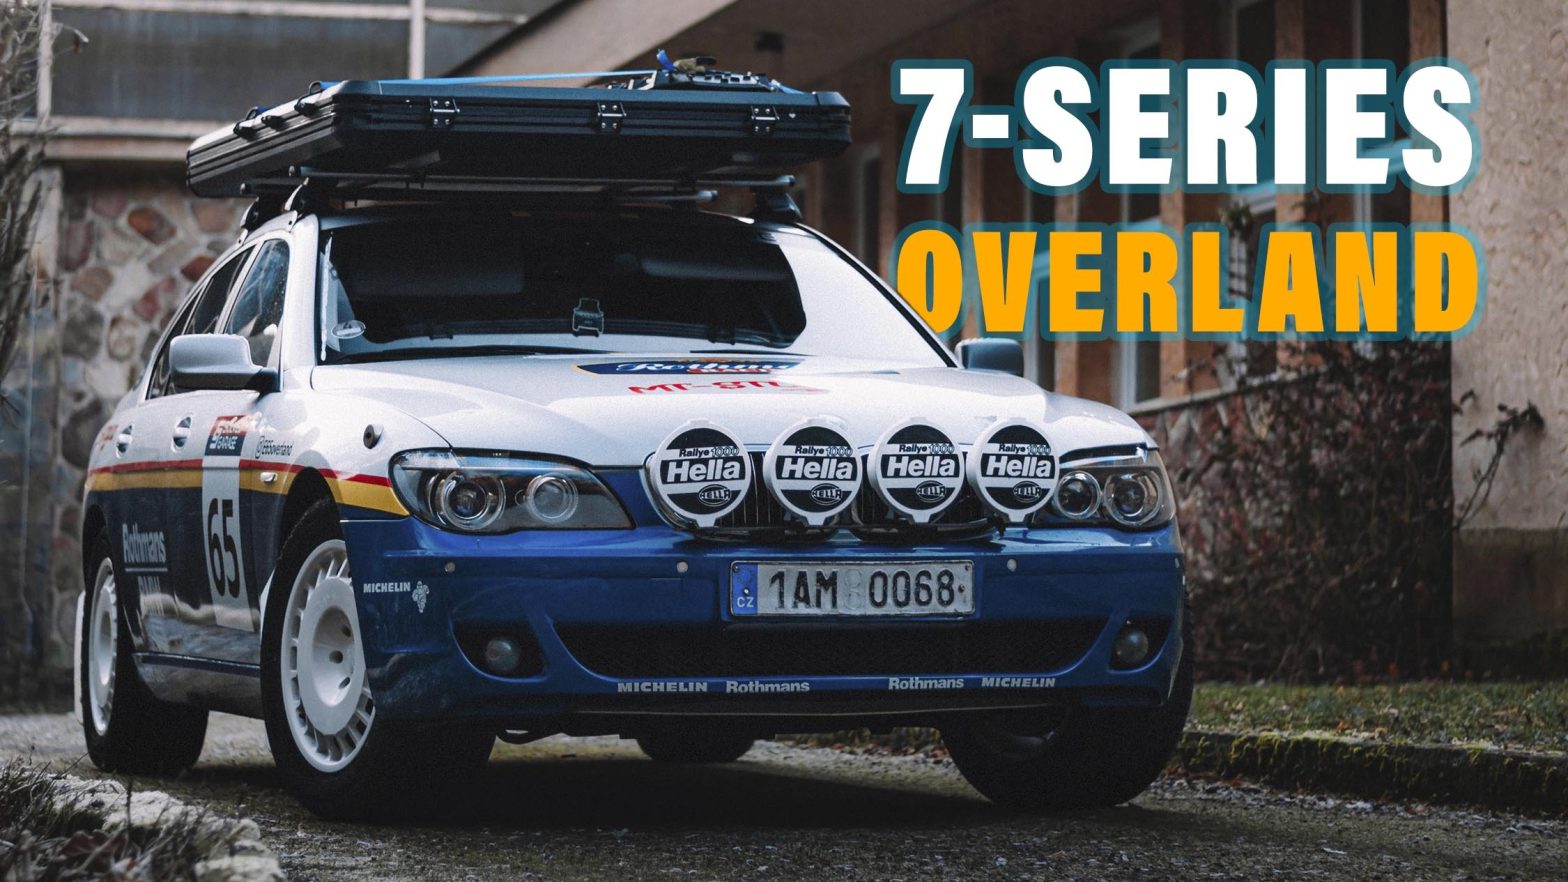 They Did What? BMW E65 7-Series Gets Turned Into An Overlanding Vehicle